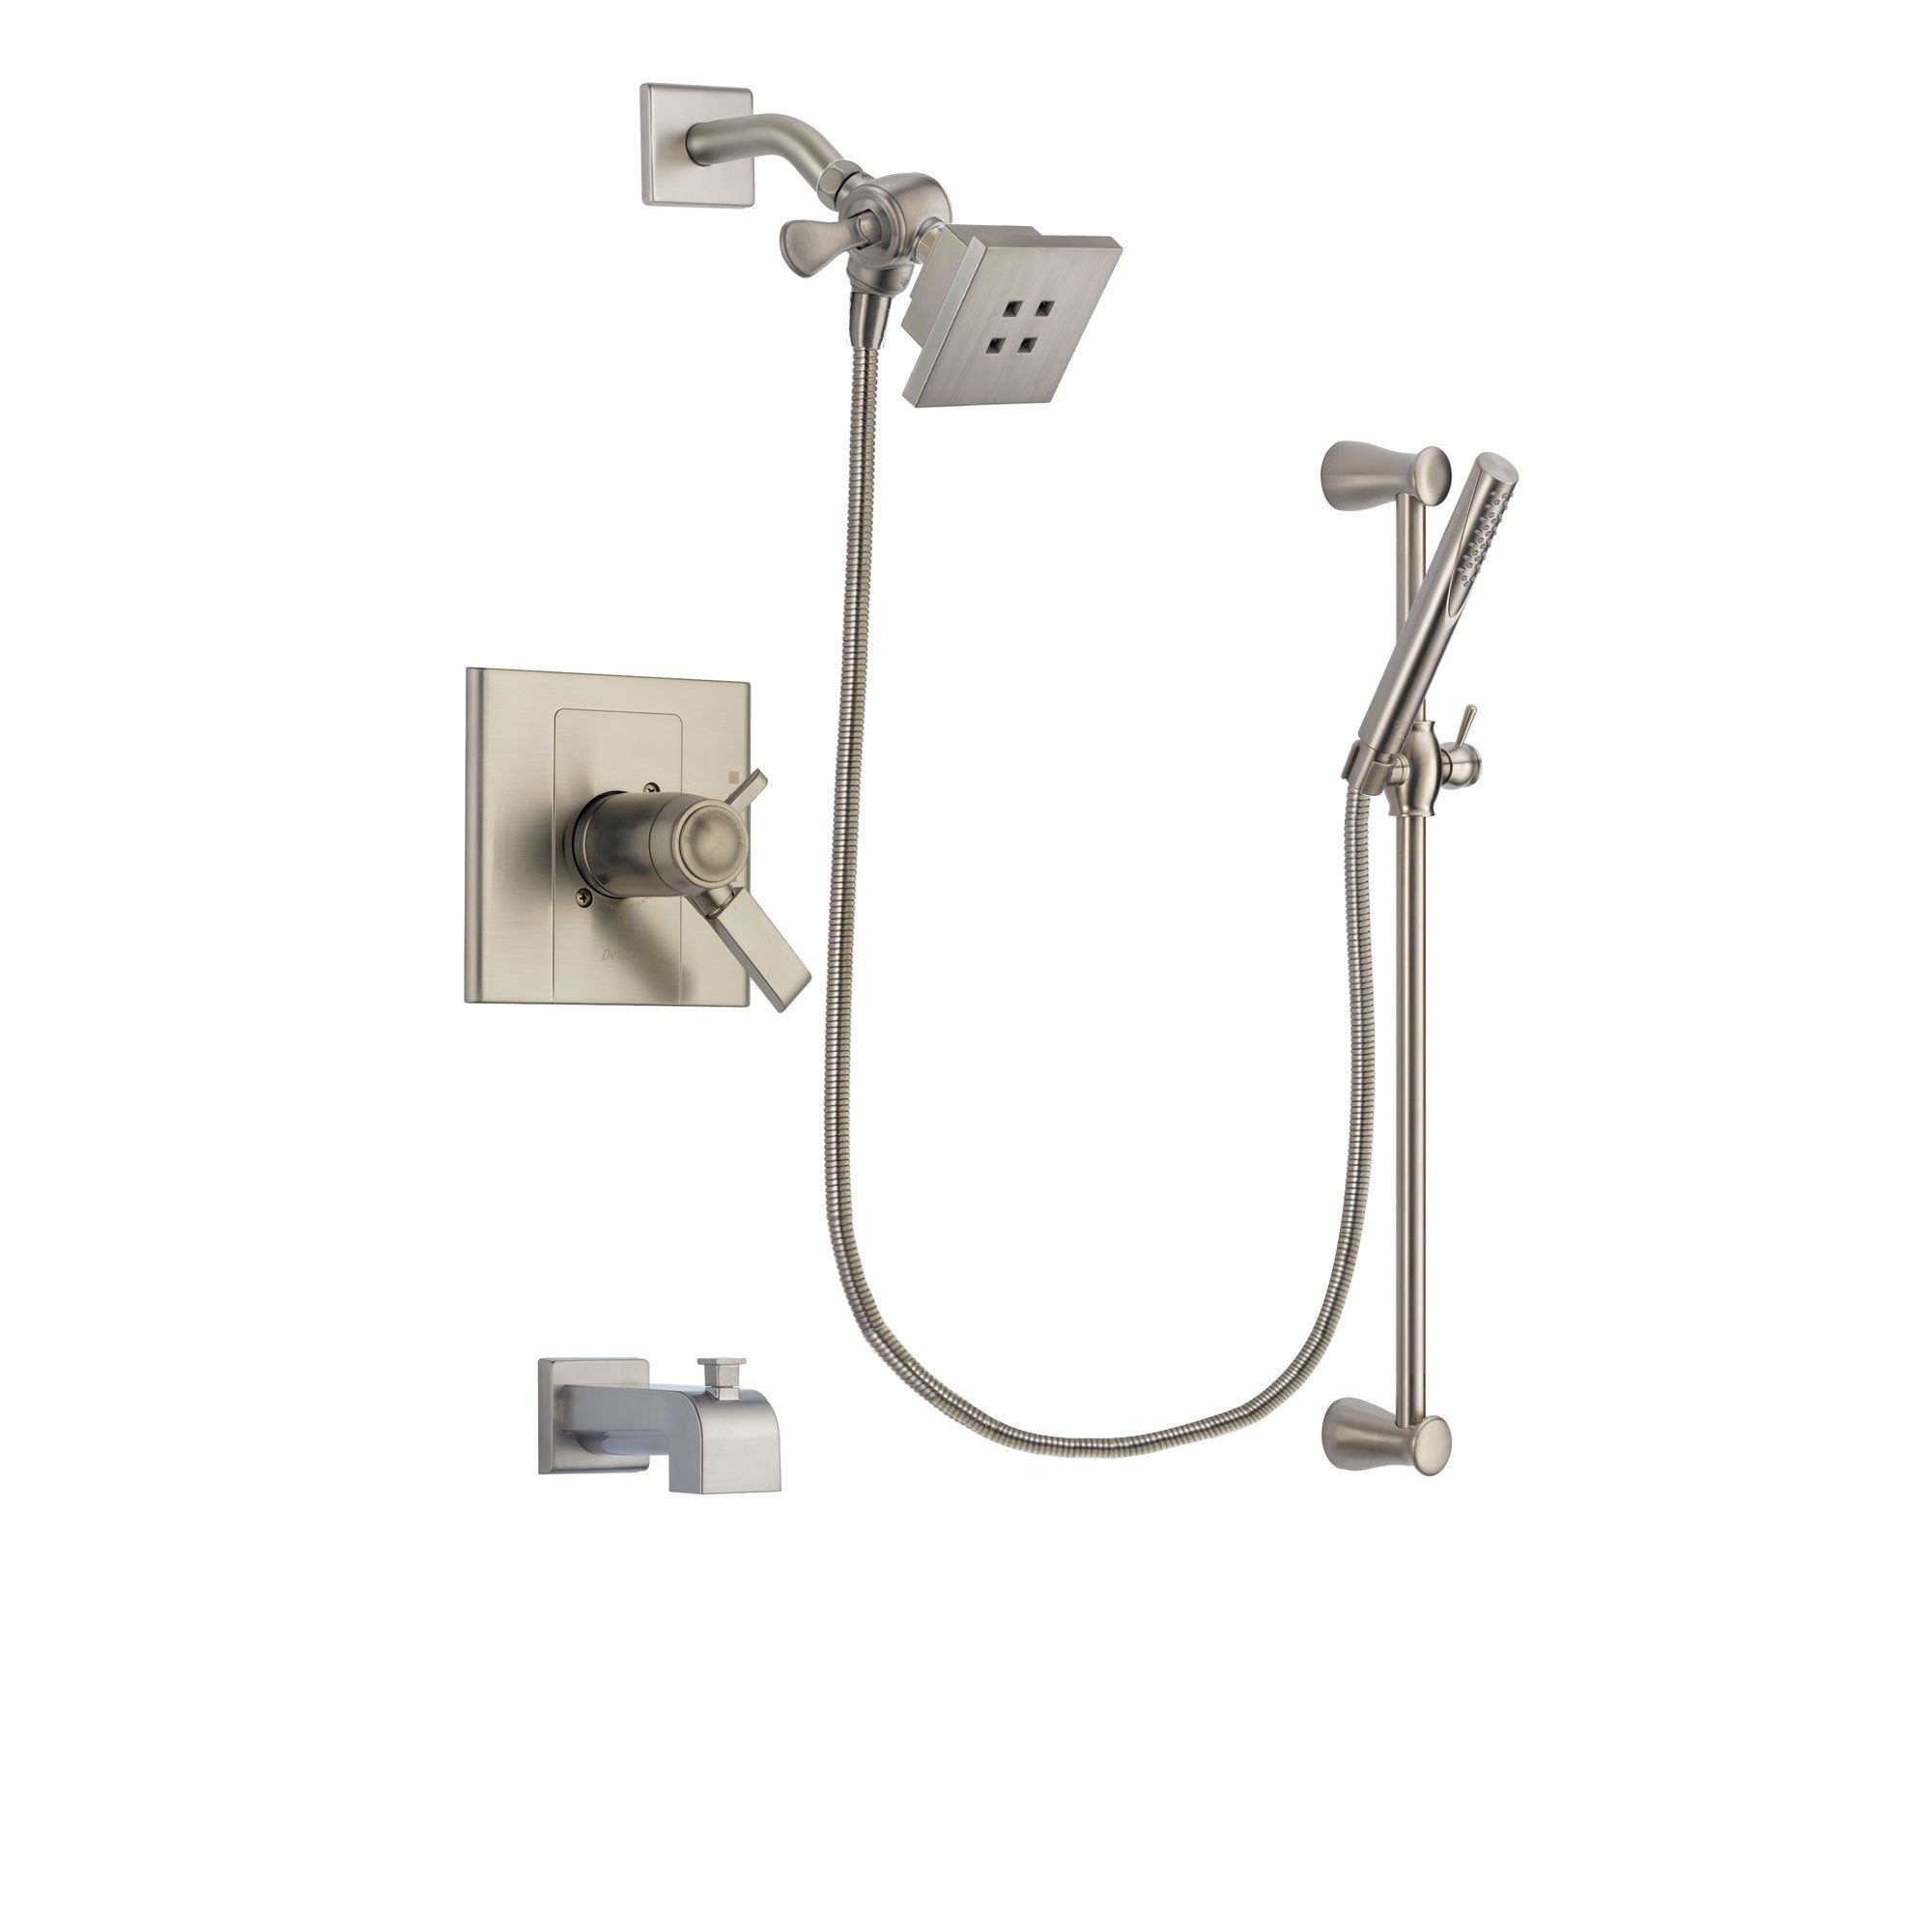 Delta Arzo Stainless Steel Finish Thermostatic Tub and Shower Faucet System Package with Square Showerhead and Handheld Shower Spray with Slide Bar Includes Rough-in Valve and Tub Spout DSP2277V